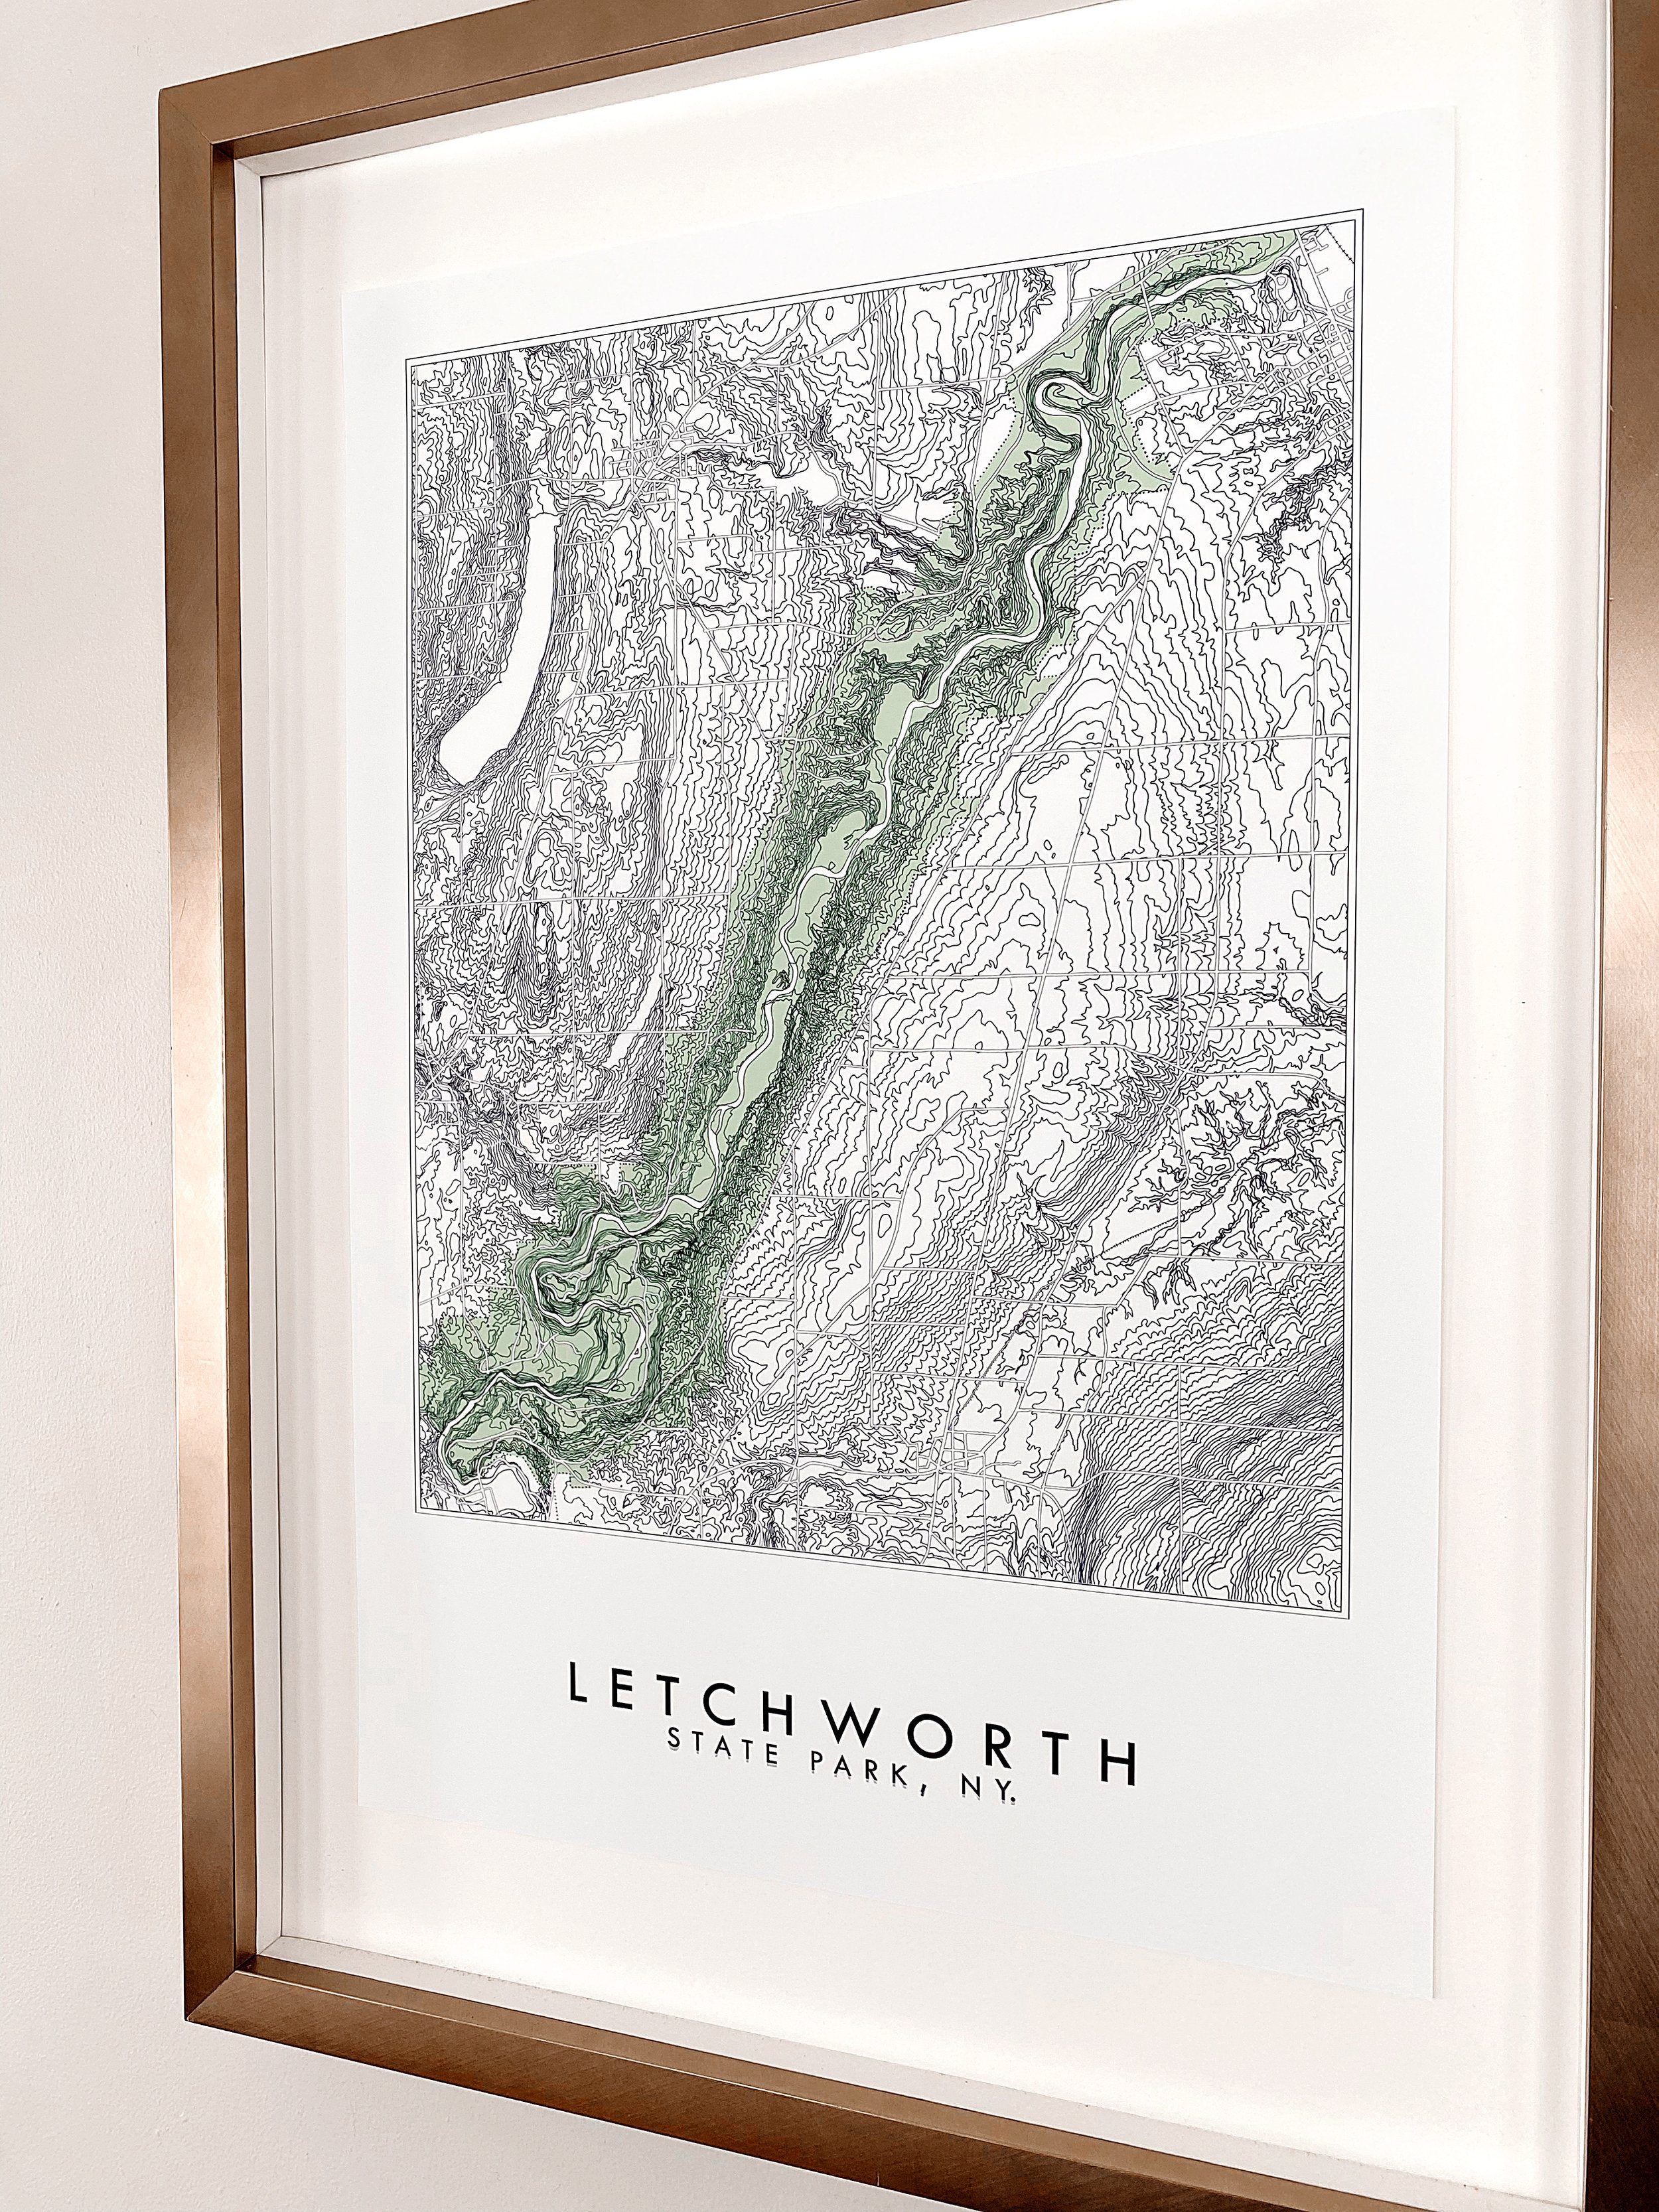 LETCHWORTH SP Topographical Map-drawing: PRINT